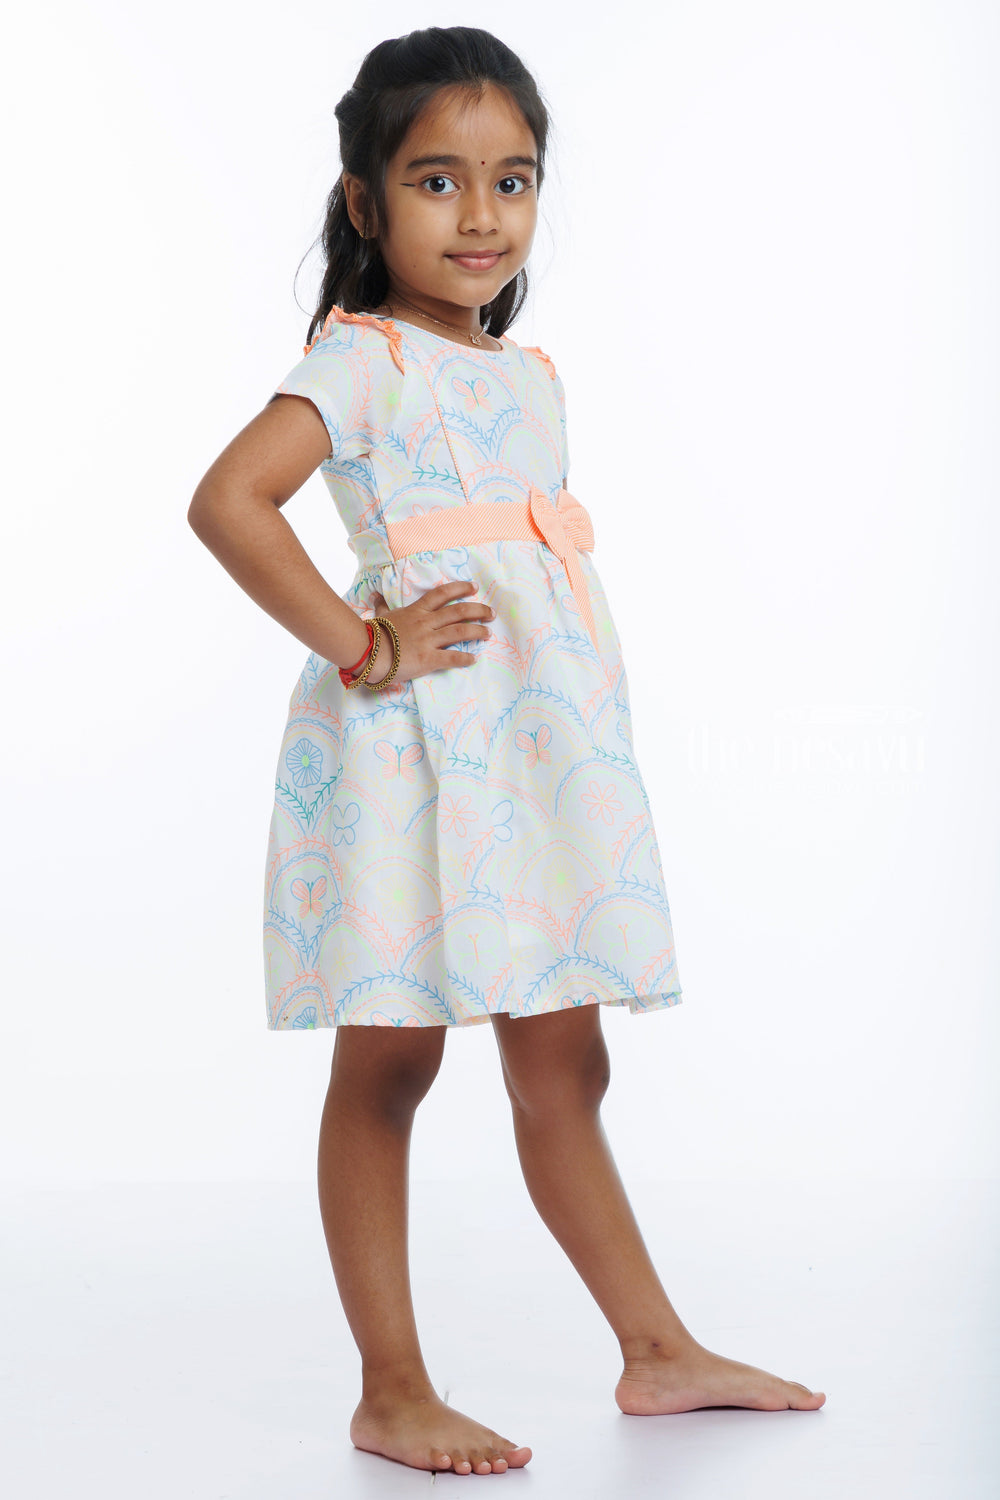 The Nesavu Girls Cotton Frock Charming Cotton Frock for Young Girls - Perfect for Festivities and Daily Wear Nesavu Buy Girls A line Cotton Frocks Online | Festive  Casual Cotton Dresses for Girls | The Nesavu